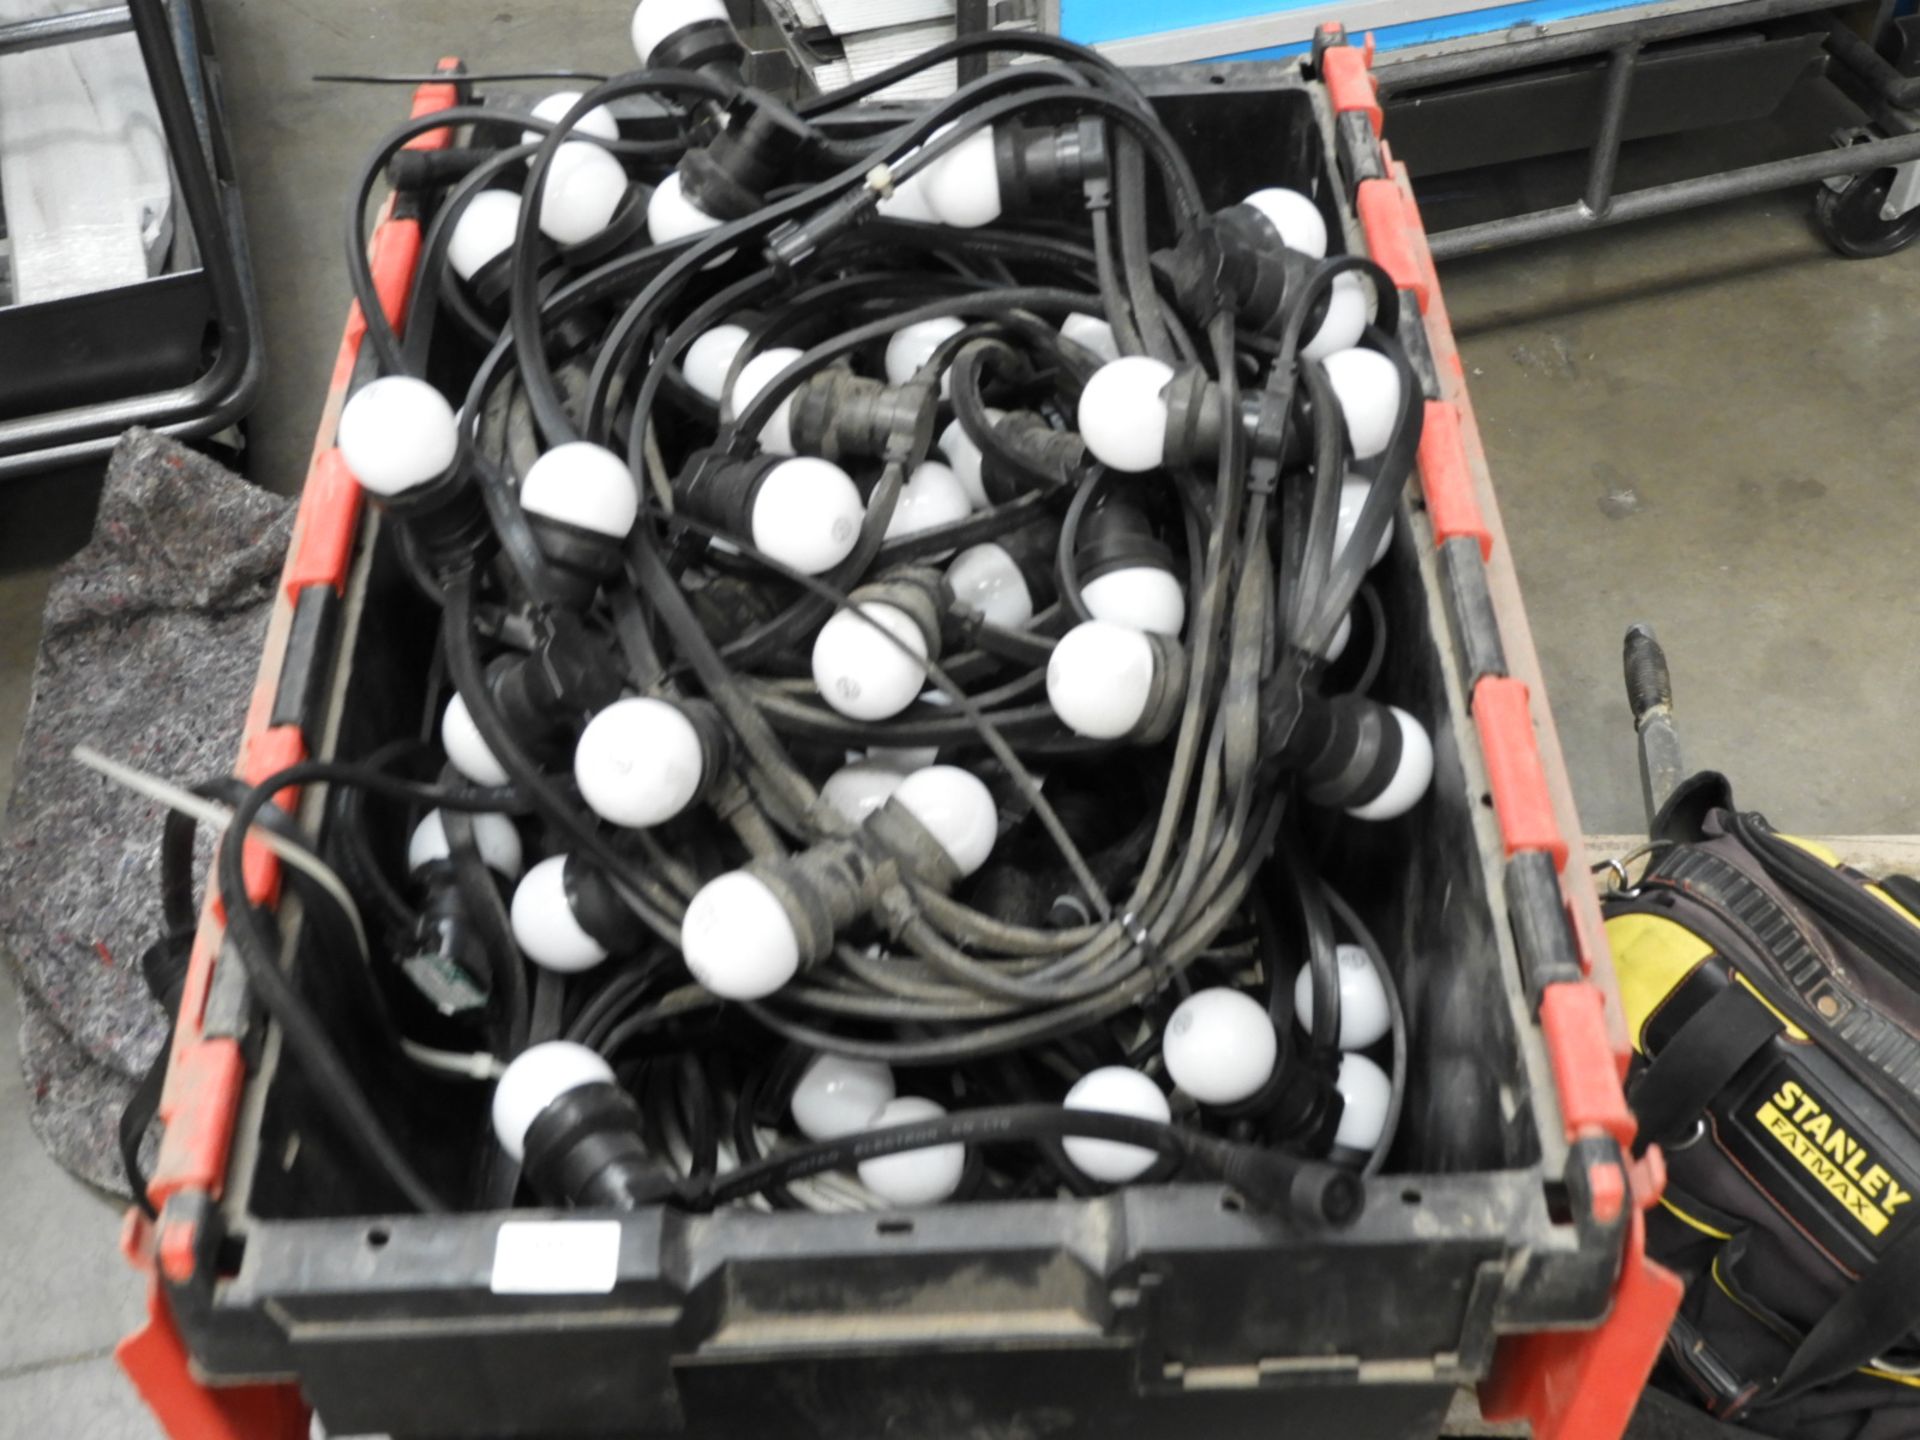 *Five 10m Lengths of Festoon Lighting with Power Supply Cables